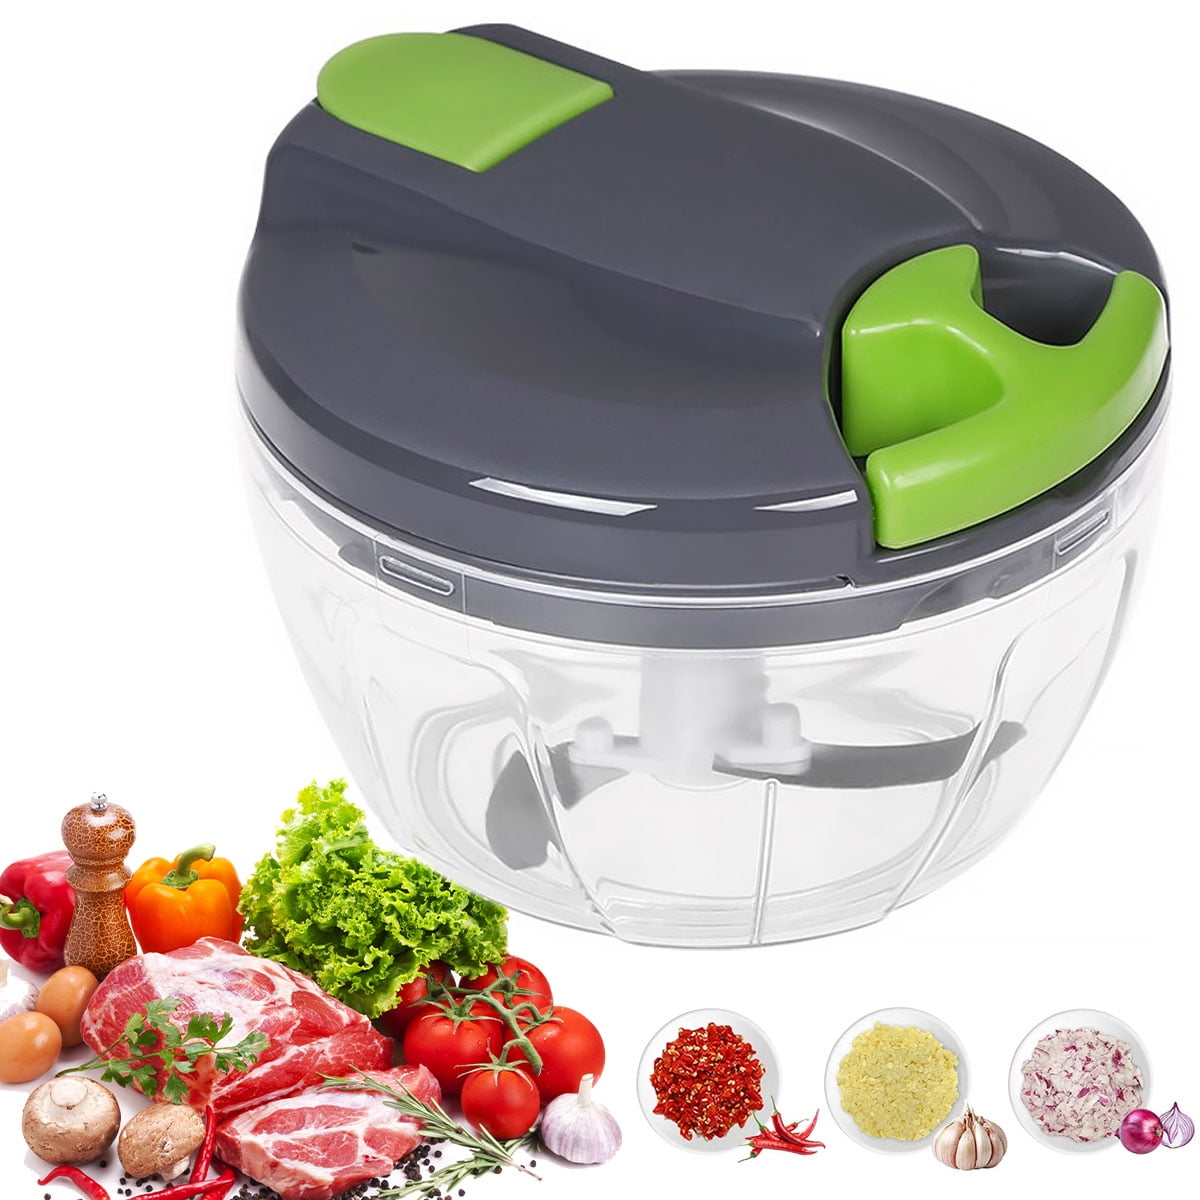 1pc Multi-Function Manual Food Chopper & Processors With Handle And Cover,  Vegetable Chopper Shredder, Garlic Press, Suitable For Onions Garlic Pepper